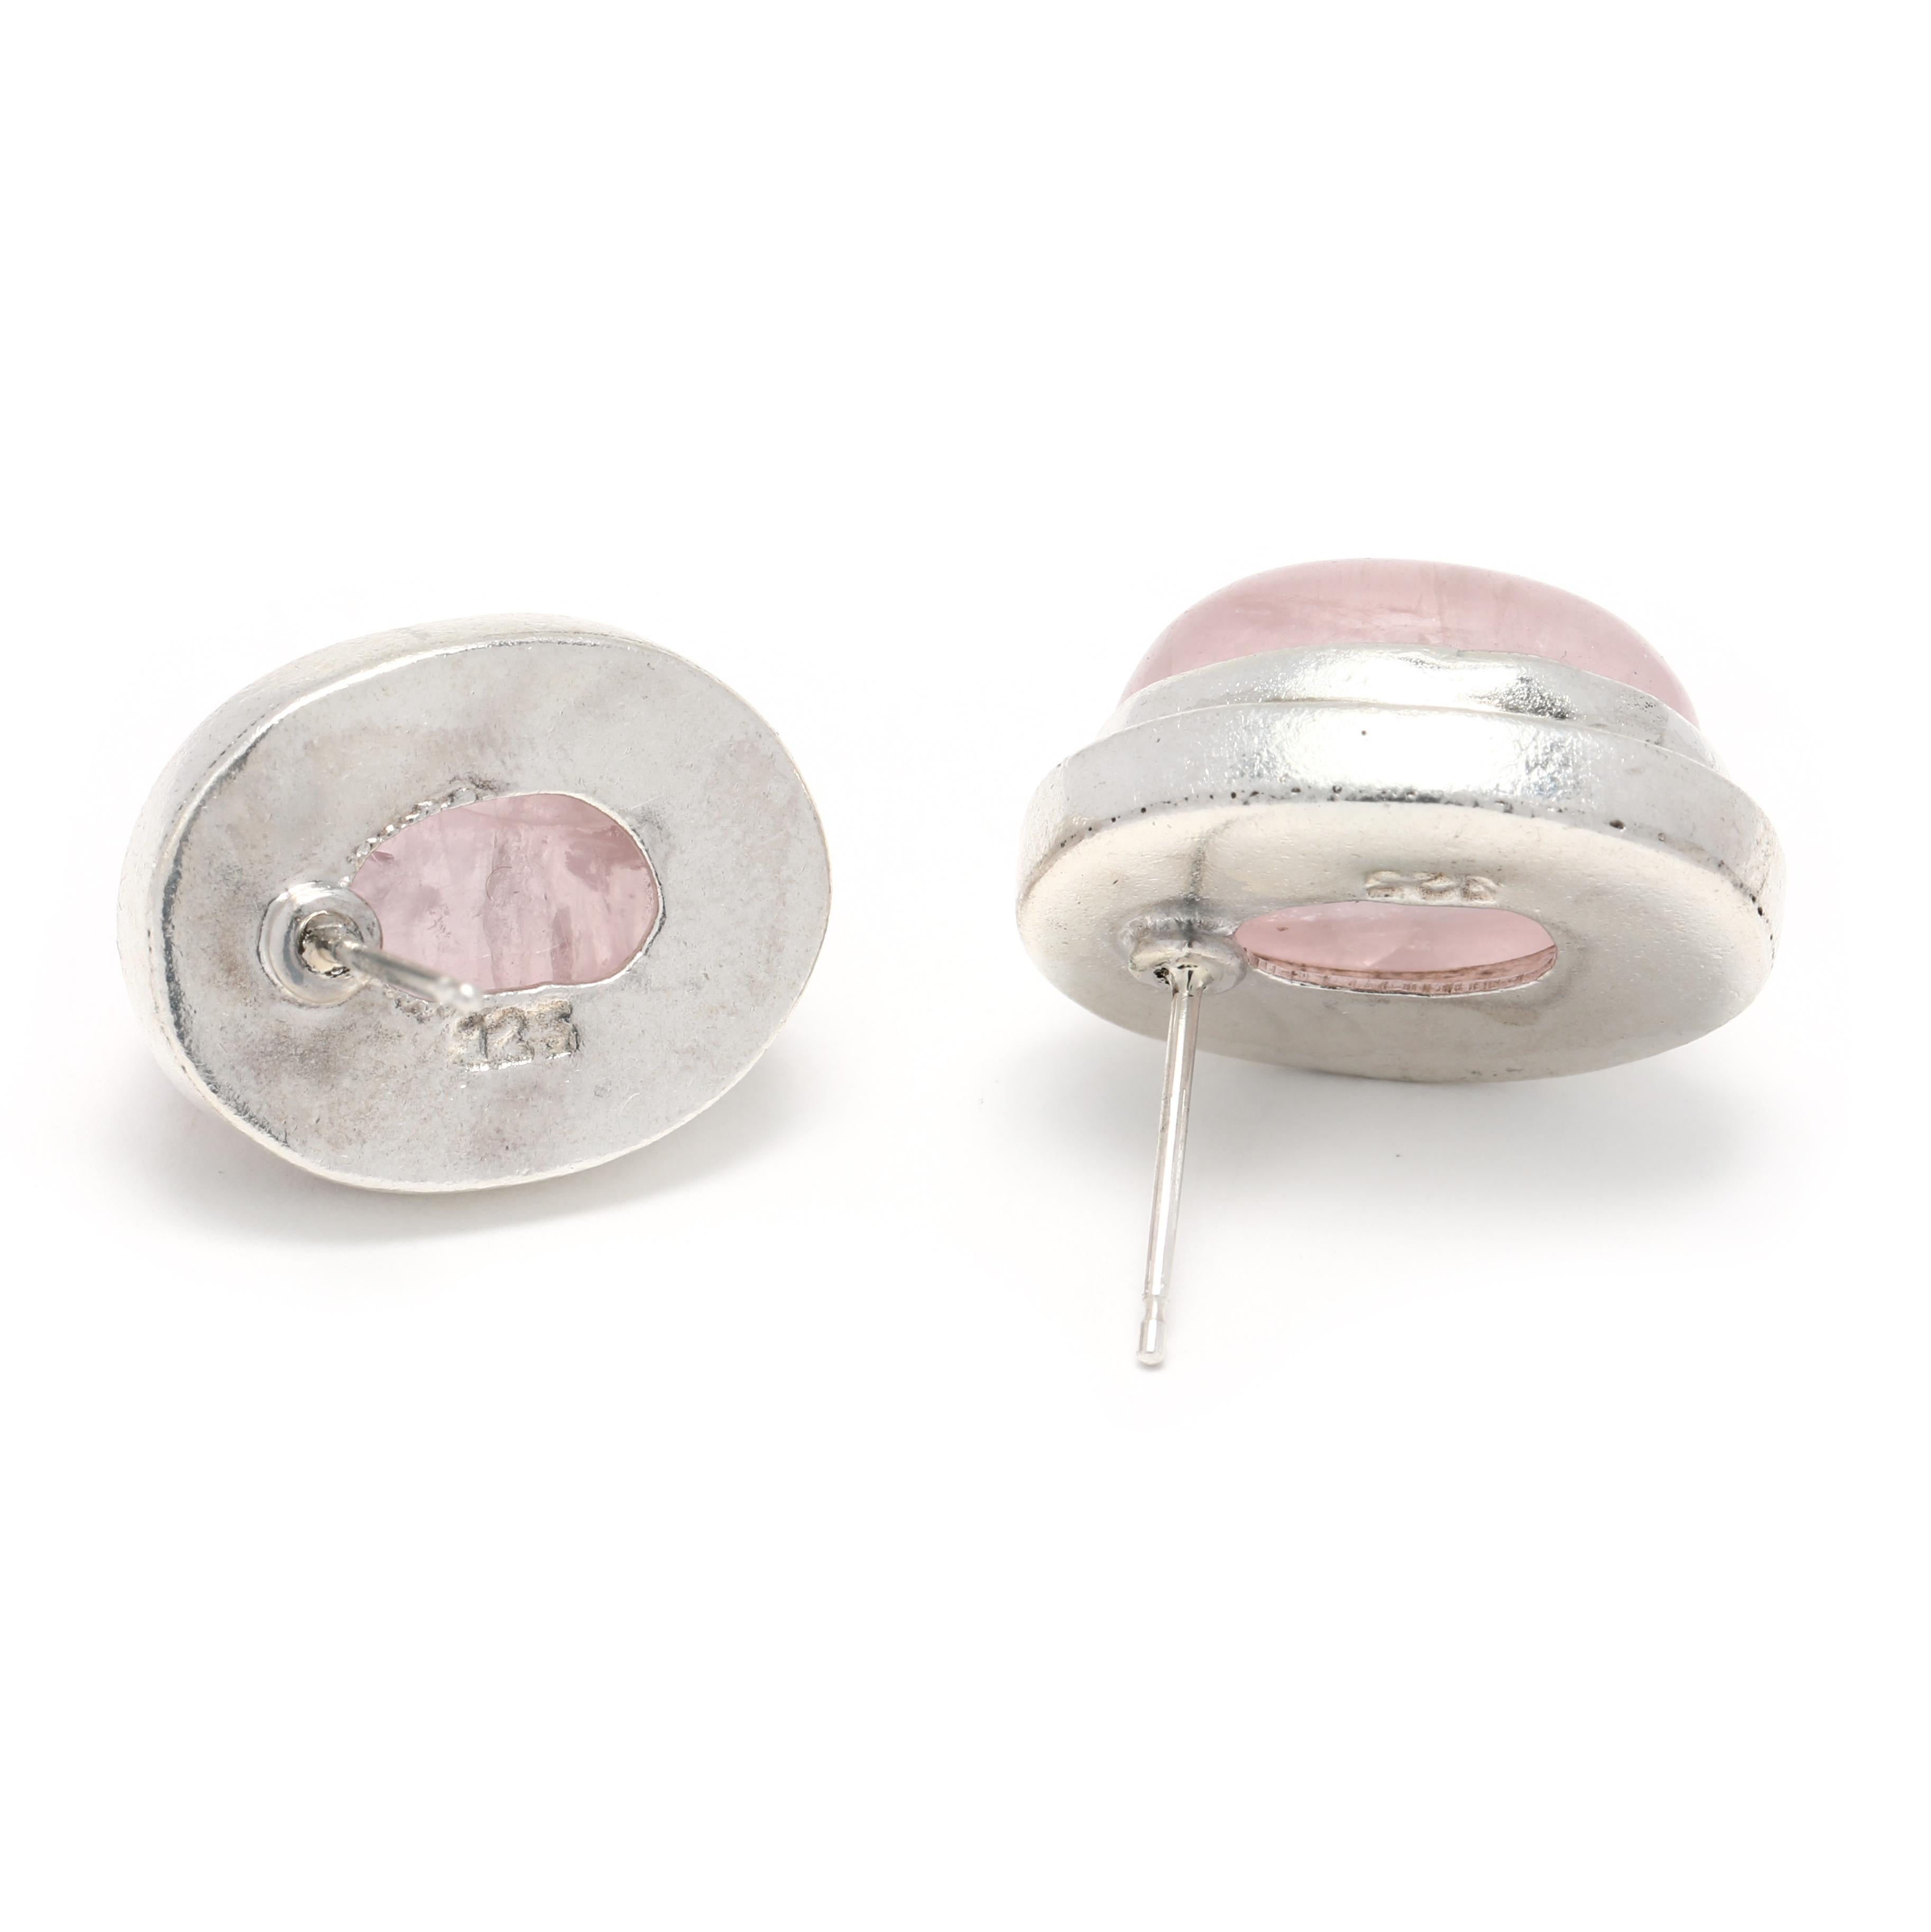 These vintage oval cabochon rose quartz stud earrings will add a touch of elegance to any look. Set in sterling silver, the large rose quartz stones measure 3/4 inch in length and feature a classic cabochon cut. The simple pink stones will add a